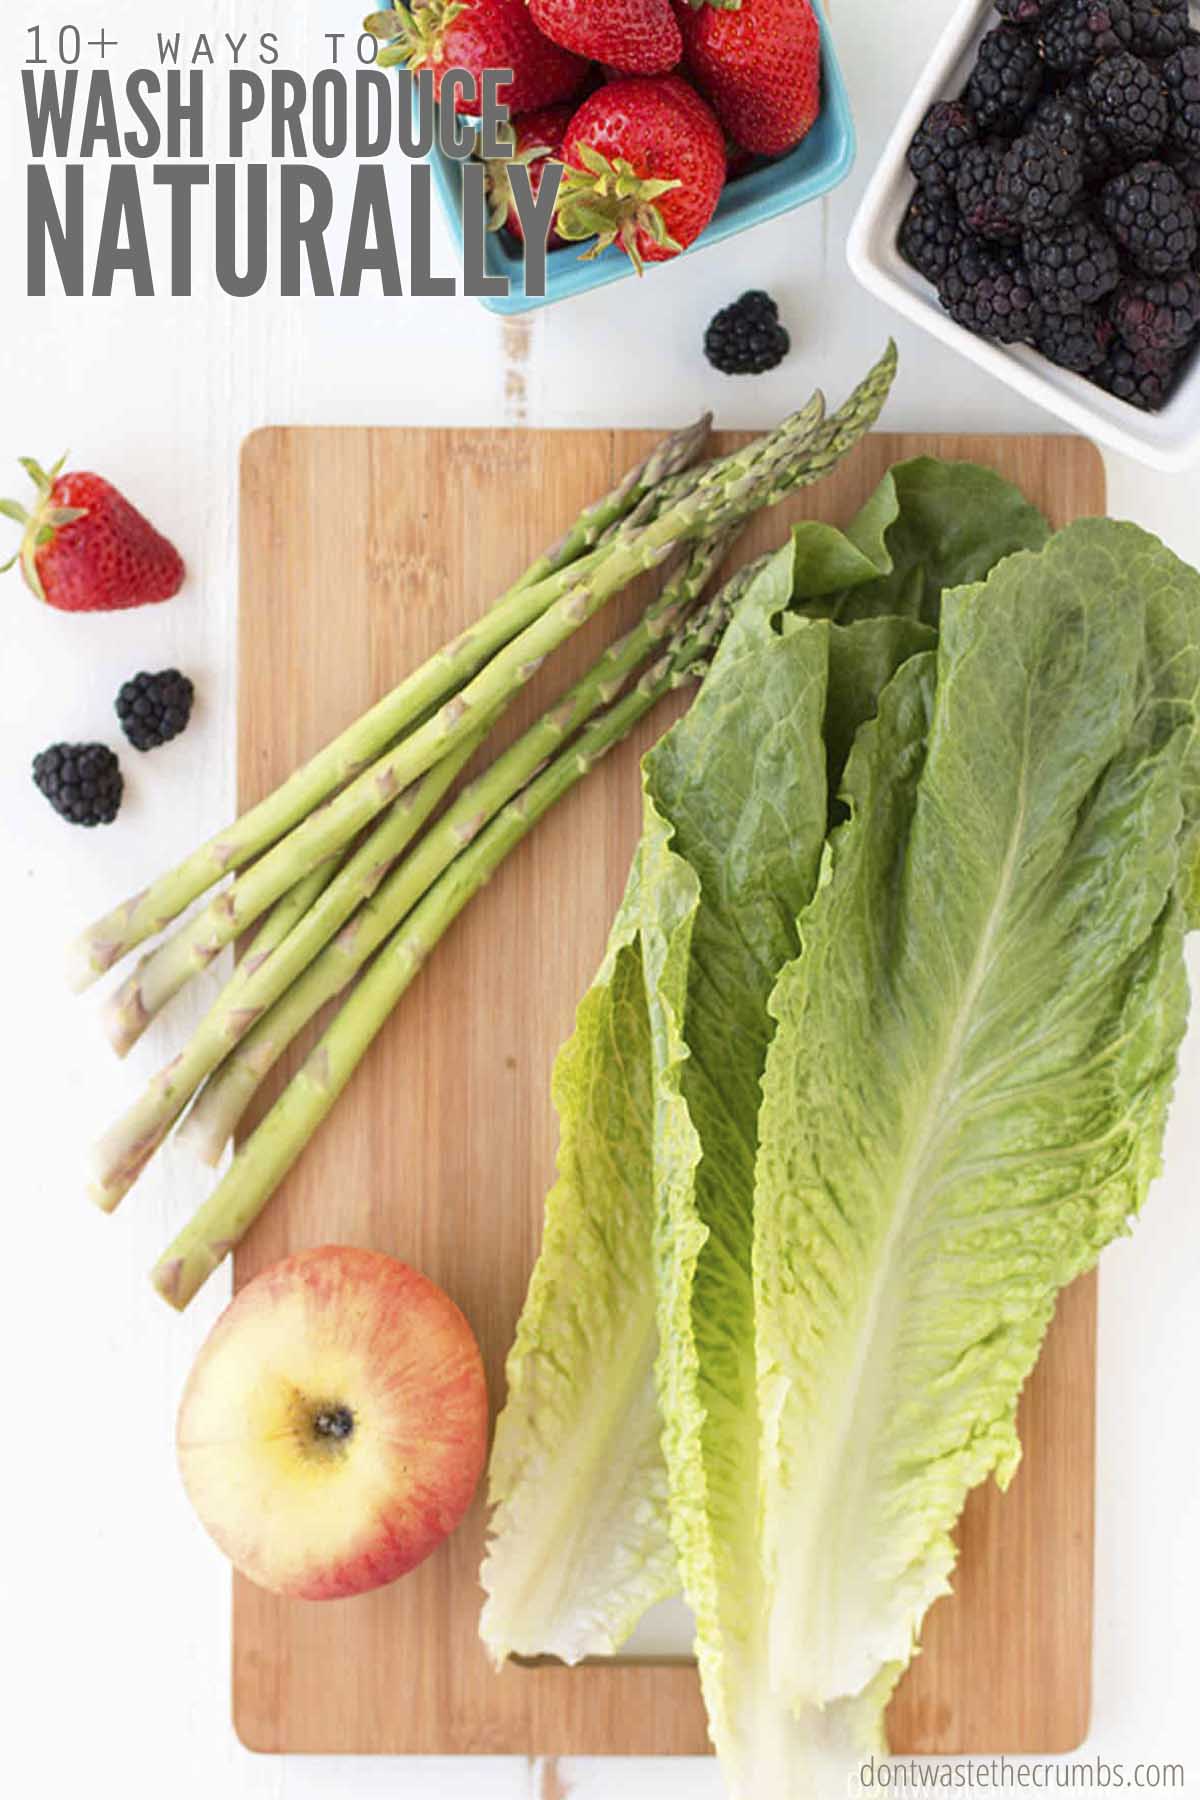 Lettuce and asparagus on a wood cutting board. Two containers of strawberries and blackberries. Text overlay 10+ ways to wash produce naturally.